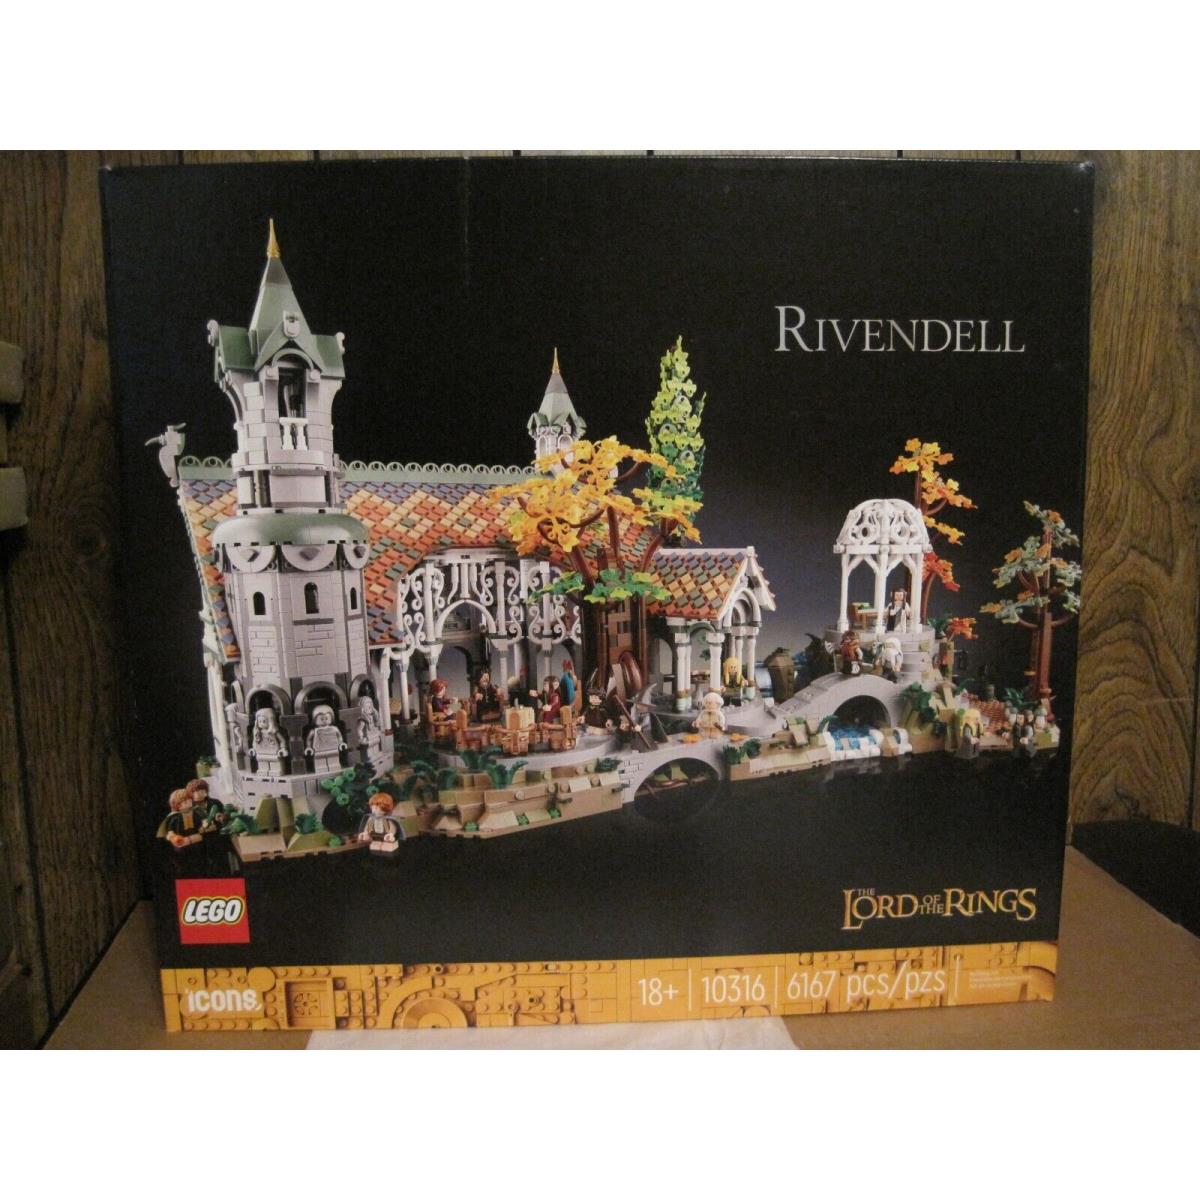 2023 Lego Icons 10316 Rivendell The Lord OF The RINGS--6167 Pieces